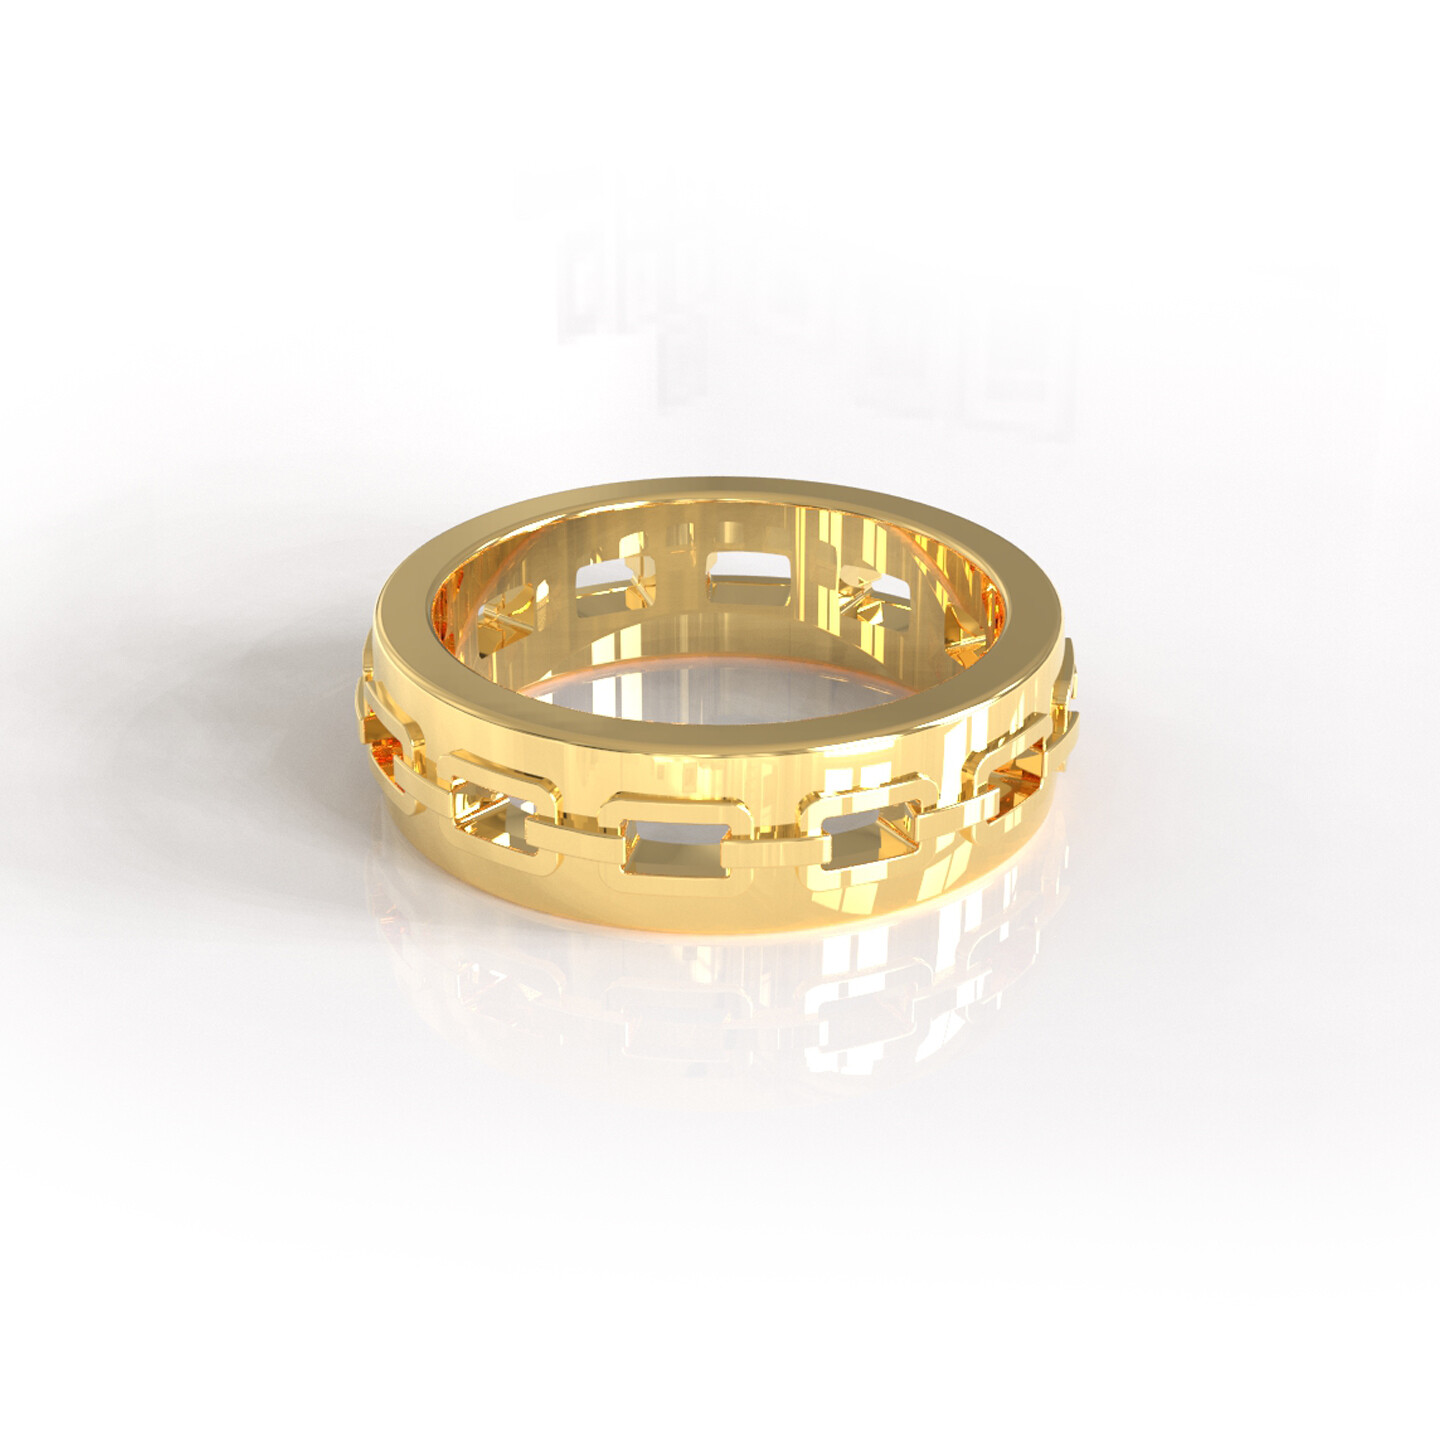 Amastouchwhenever Embracing Self Empowerment Ring Gold Colour EU/FRANCE SIZE 57.6mm inner diameter